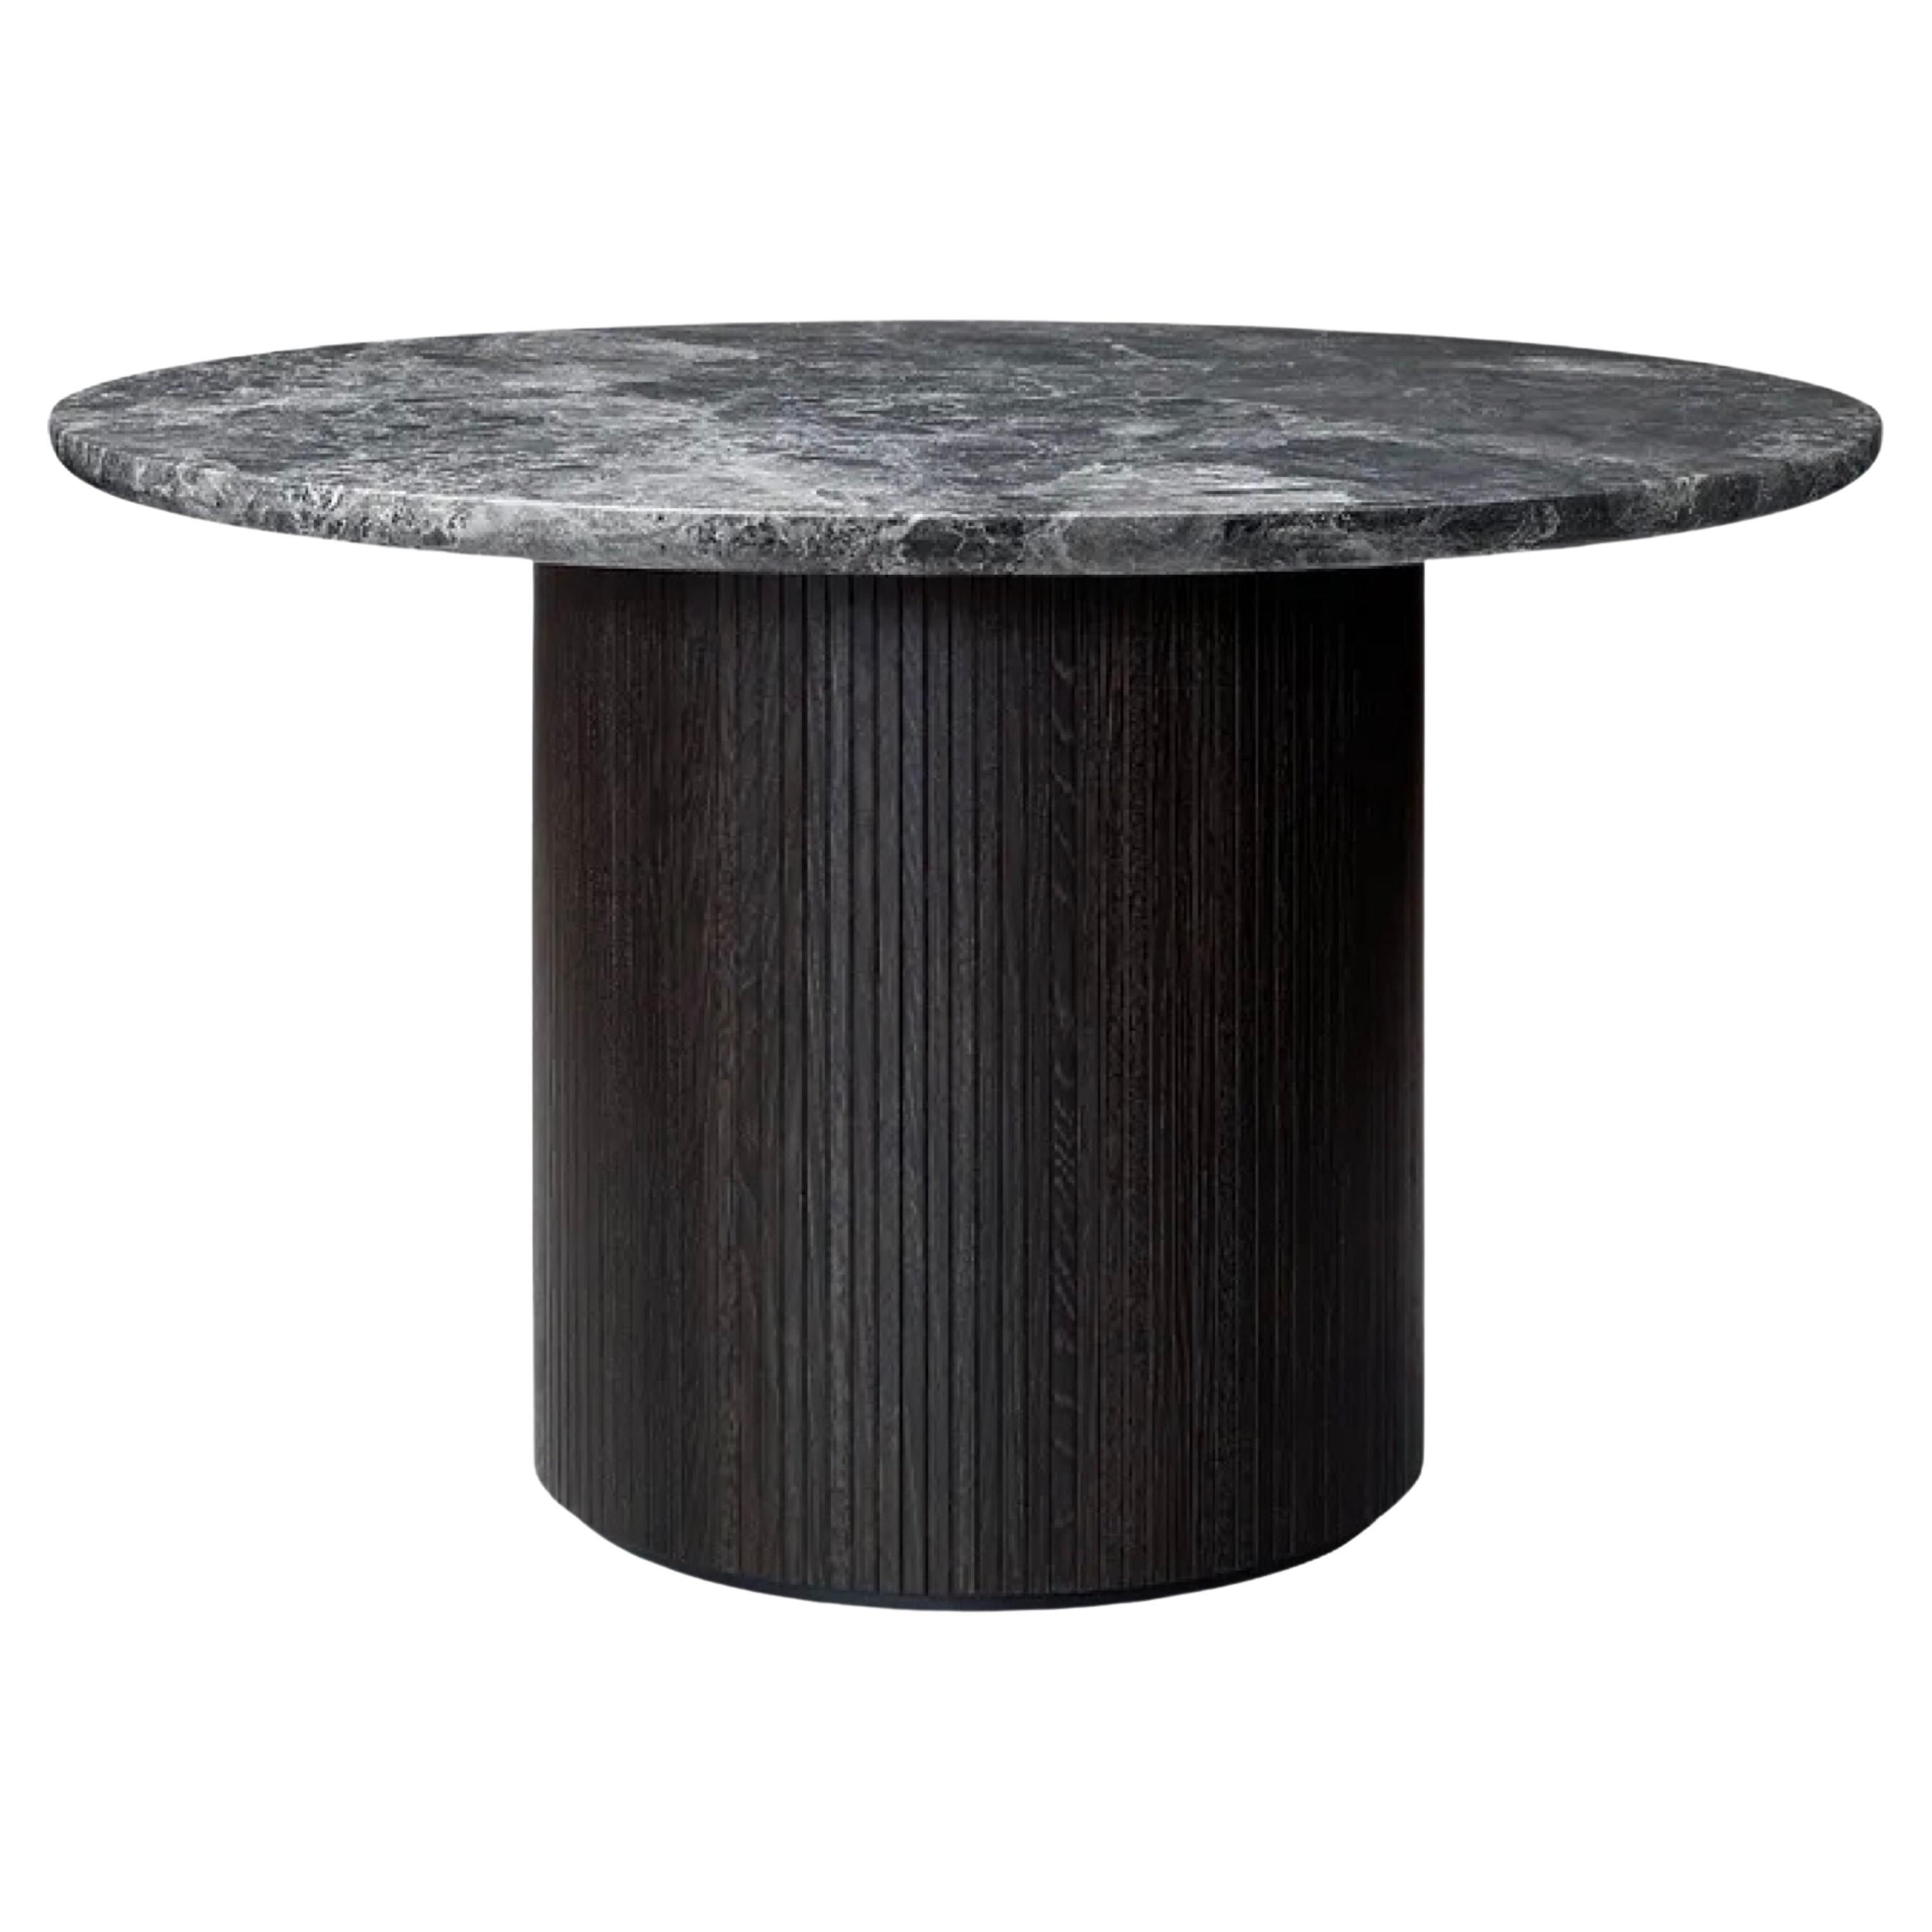 Gubi Moon Round Dining Table by Space Copenhagen